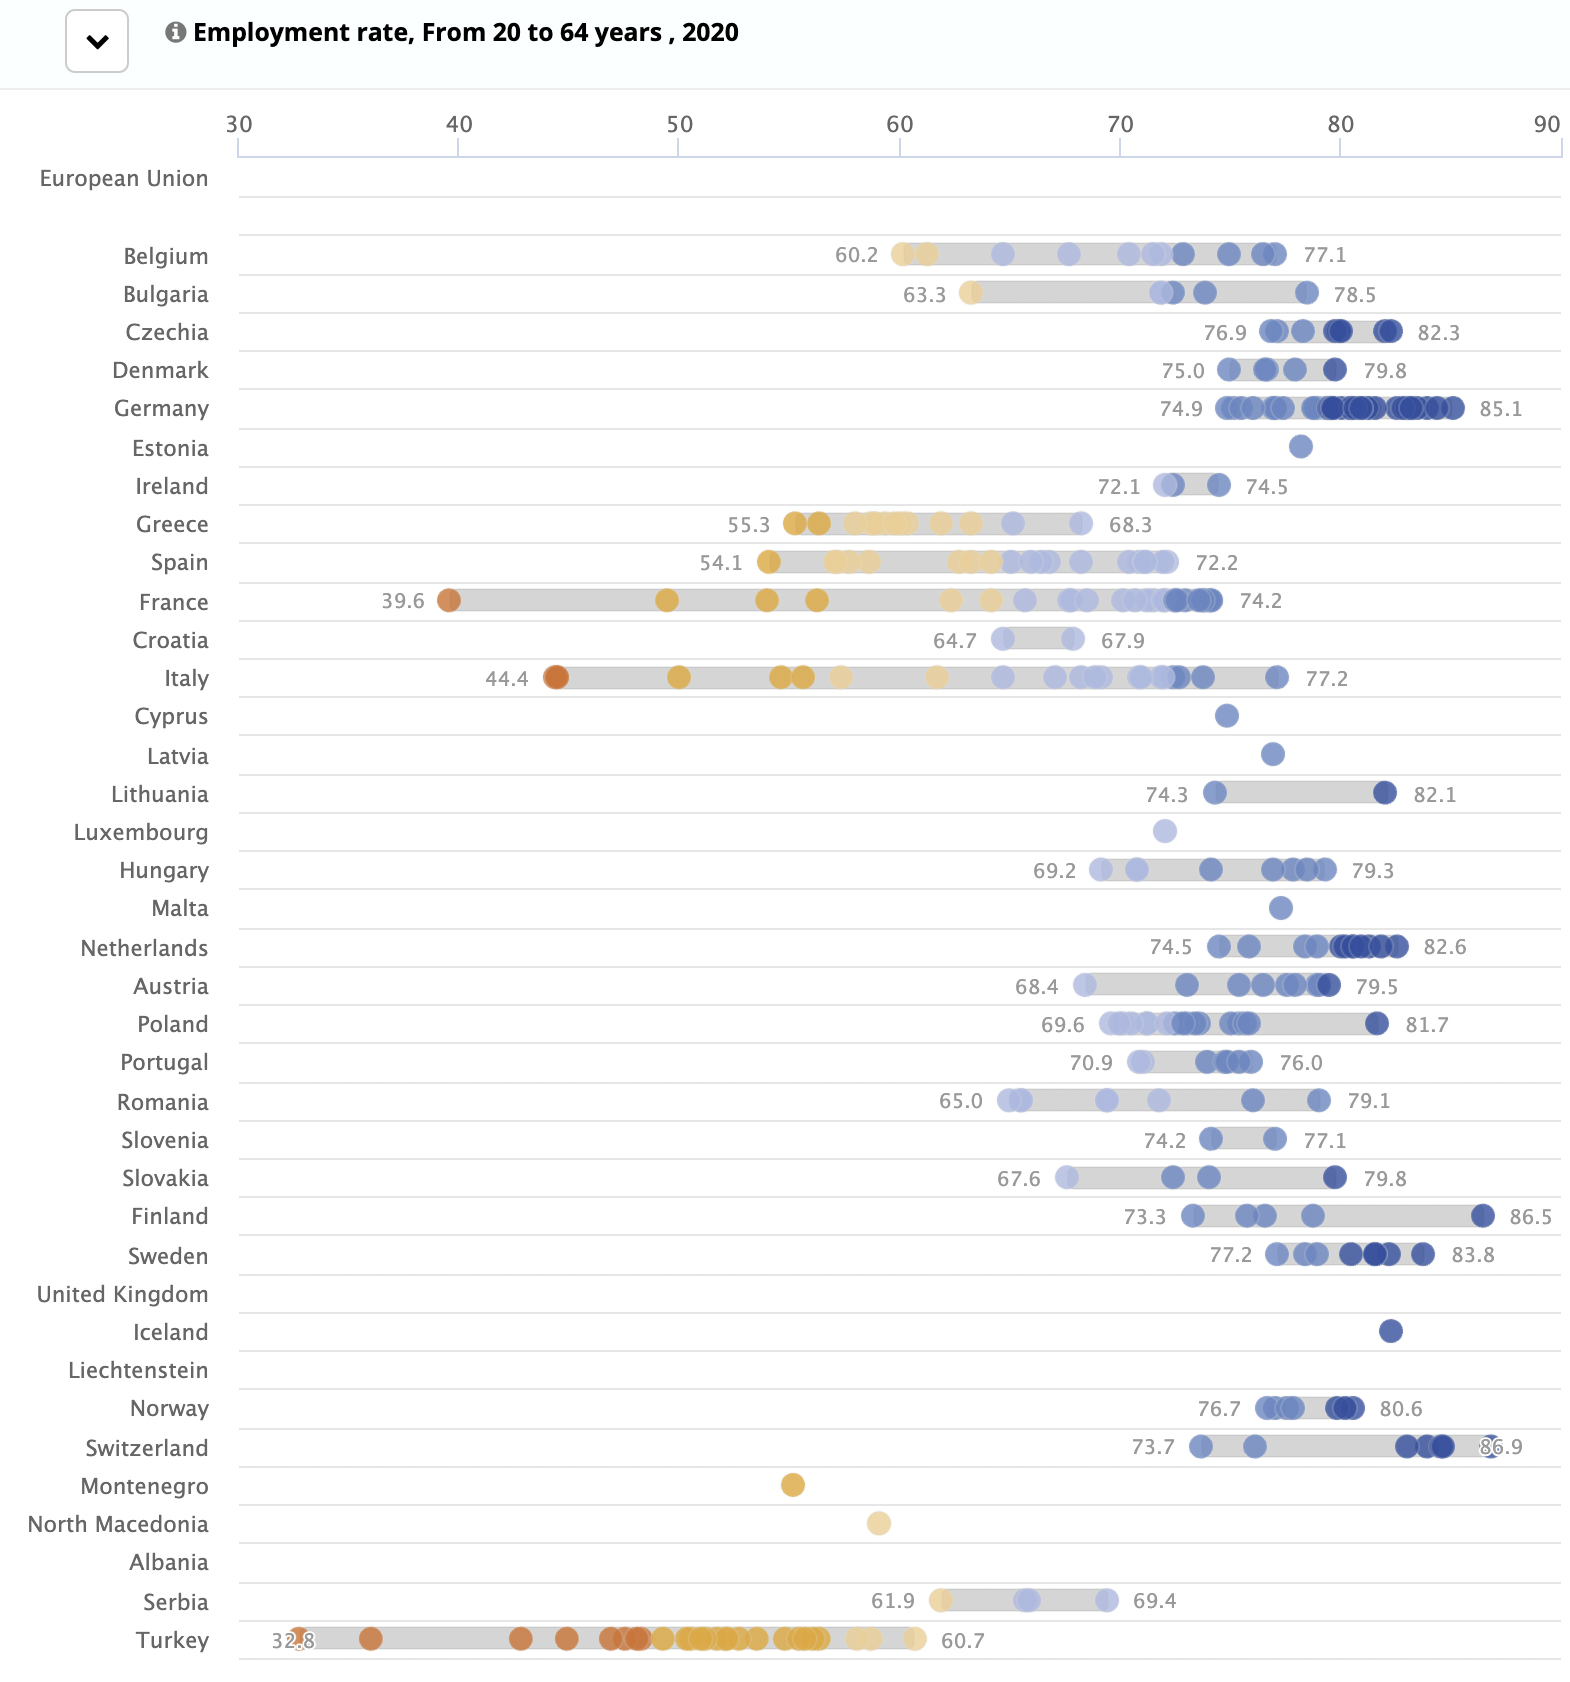 A dot plot showing the employment rates for EU regions